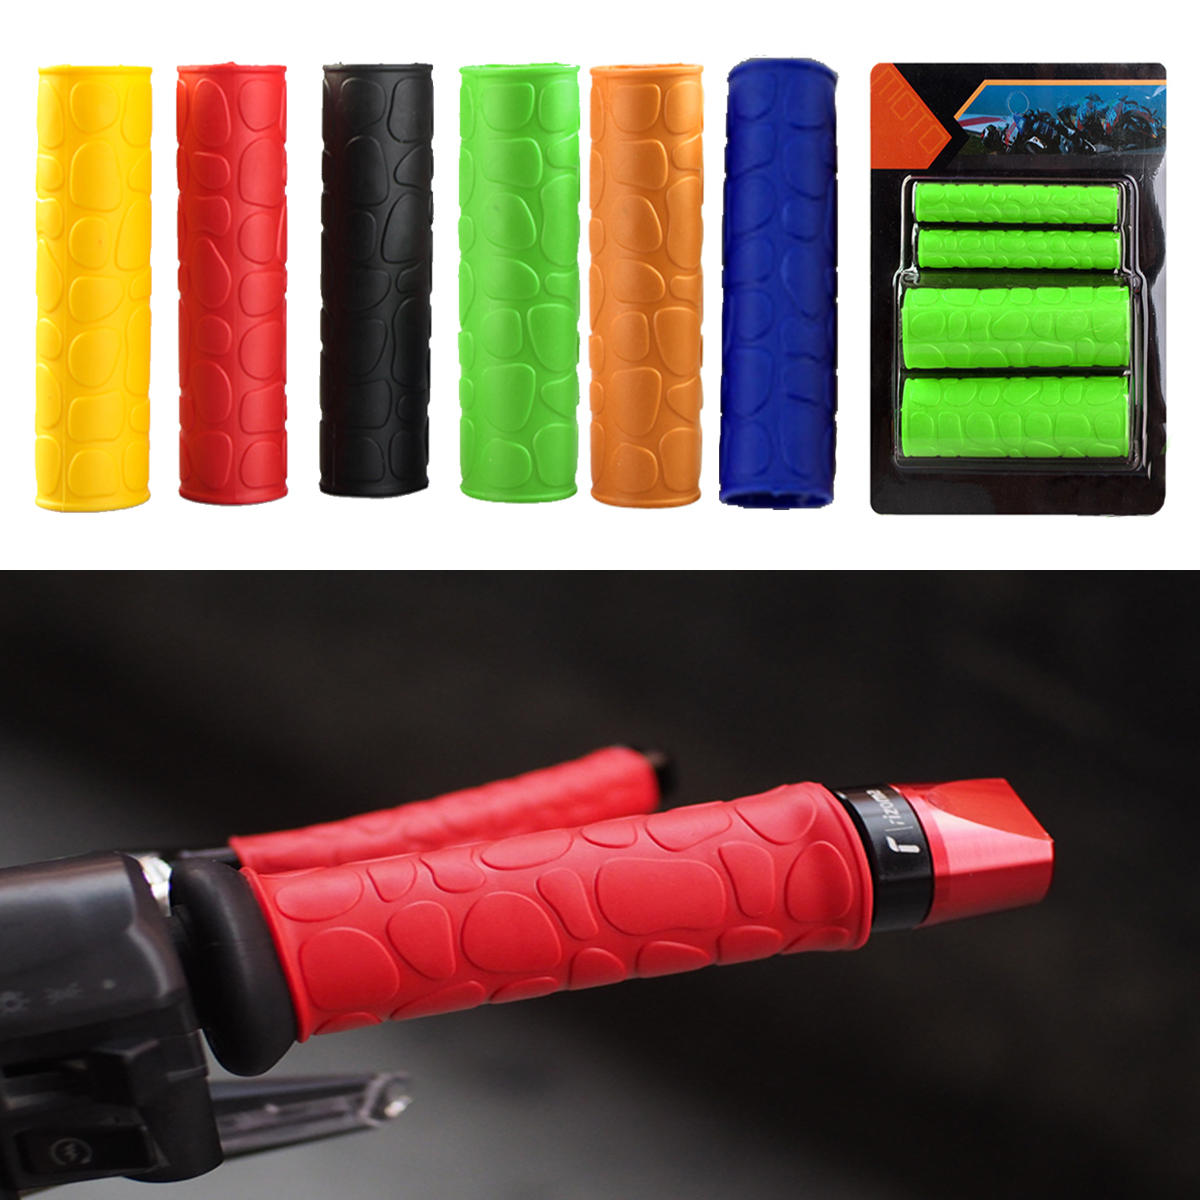 Rubber Handlebar Grip Cover with Brake Clutch Lever Cover For Motorcycle Bike MTB